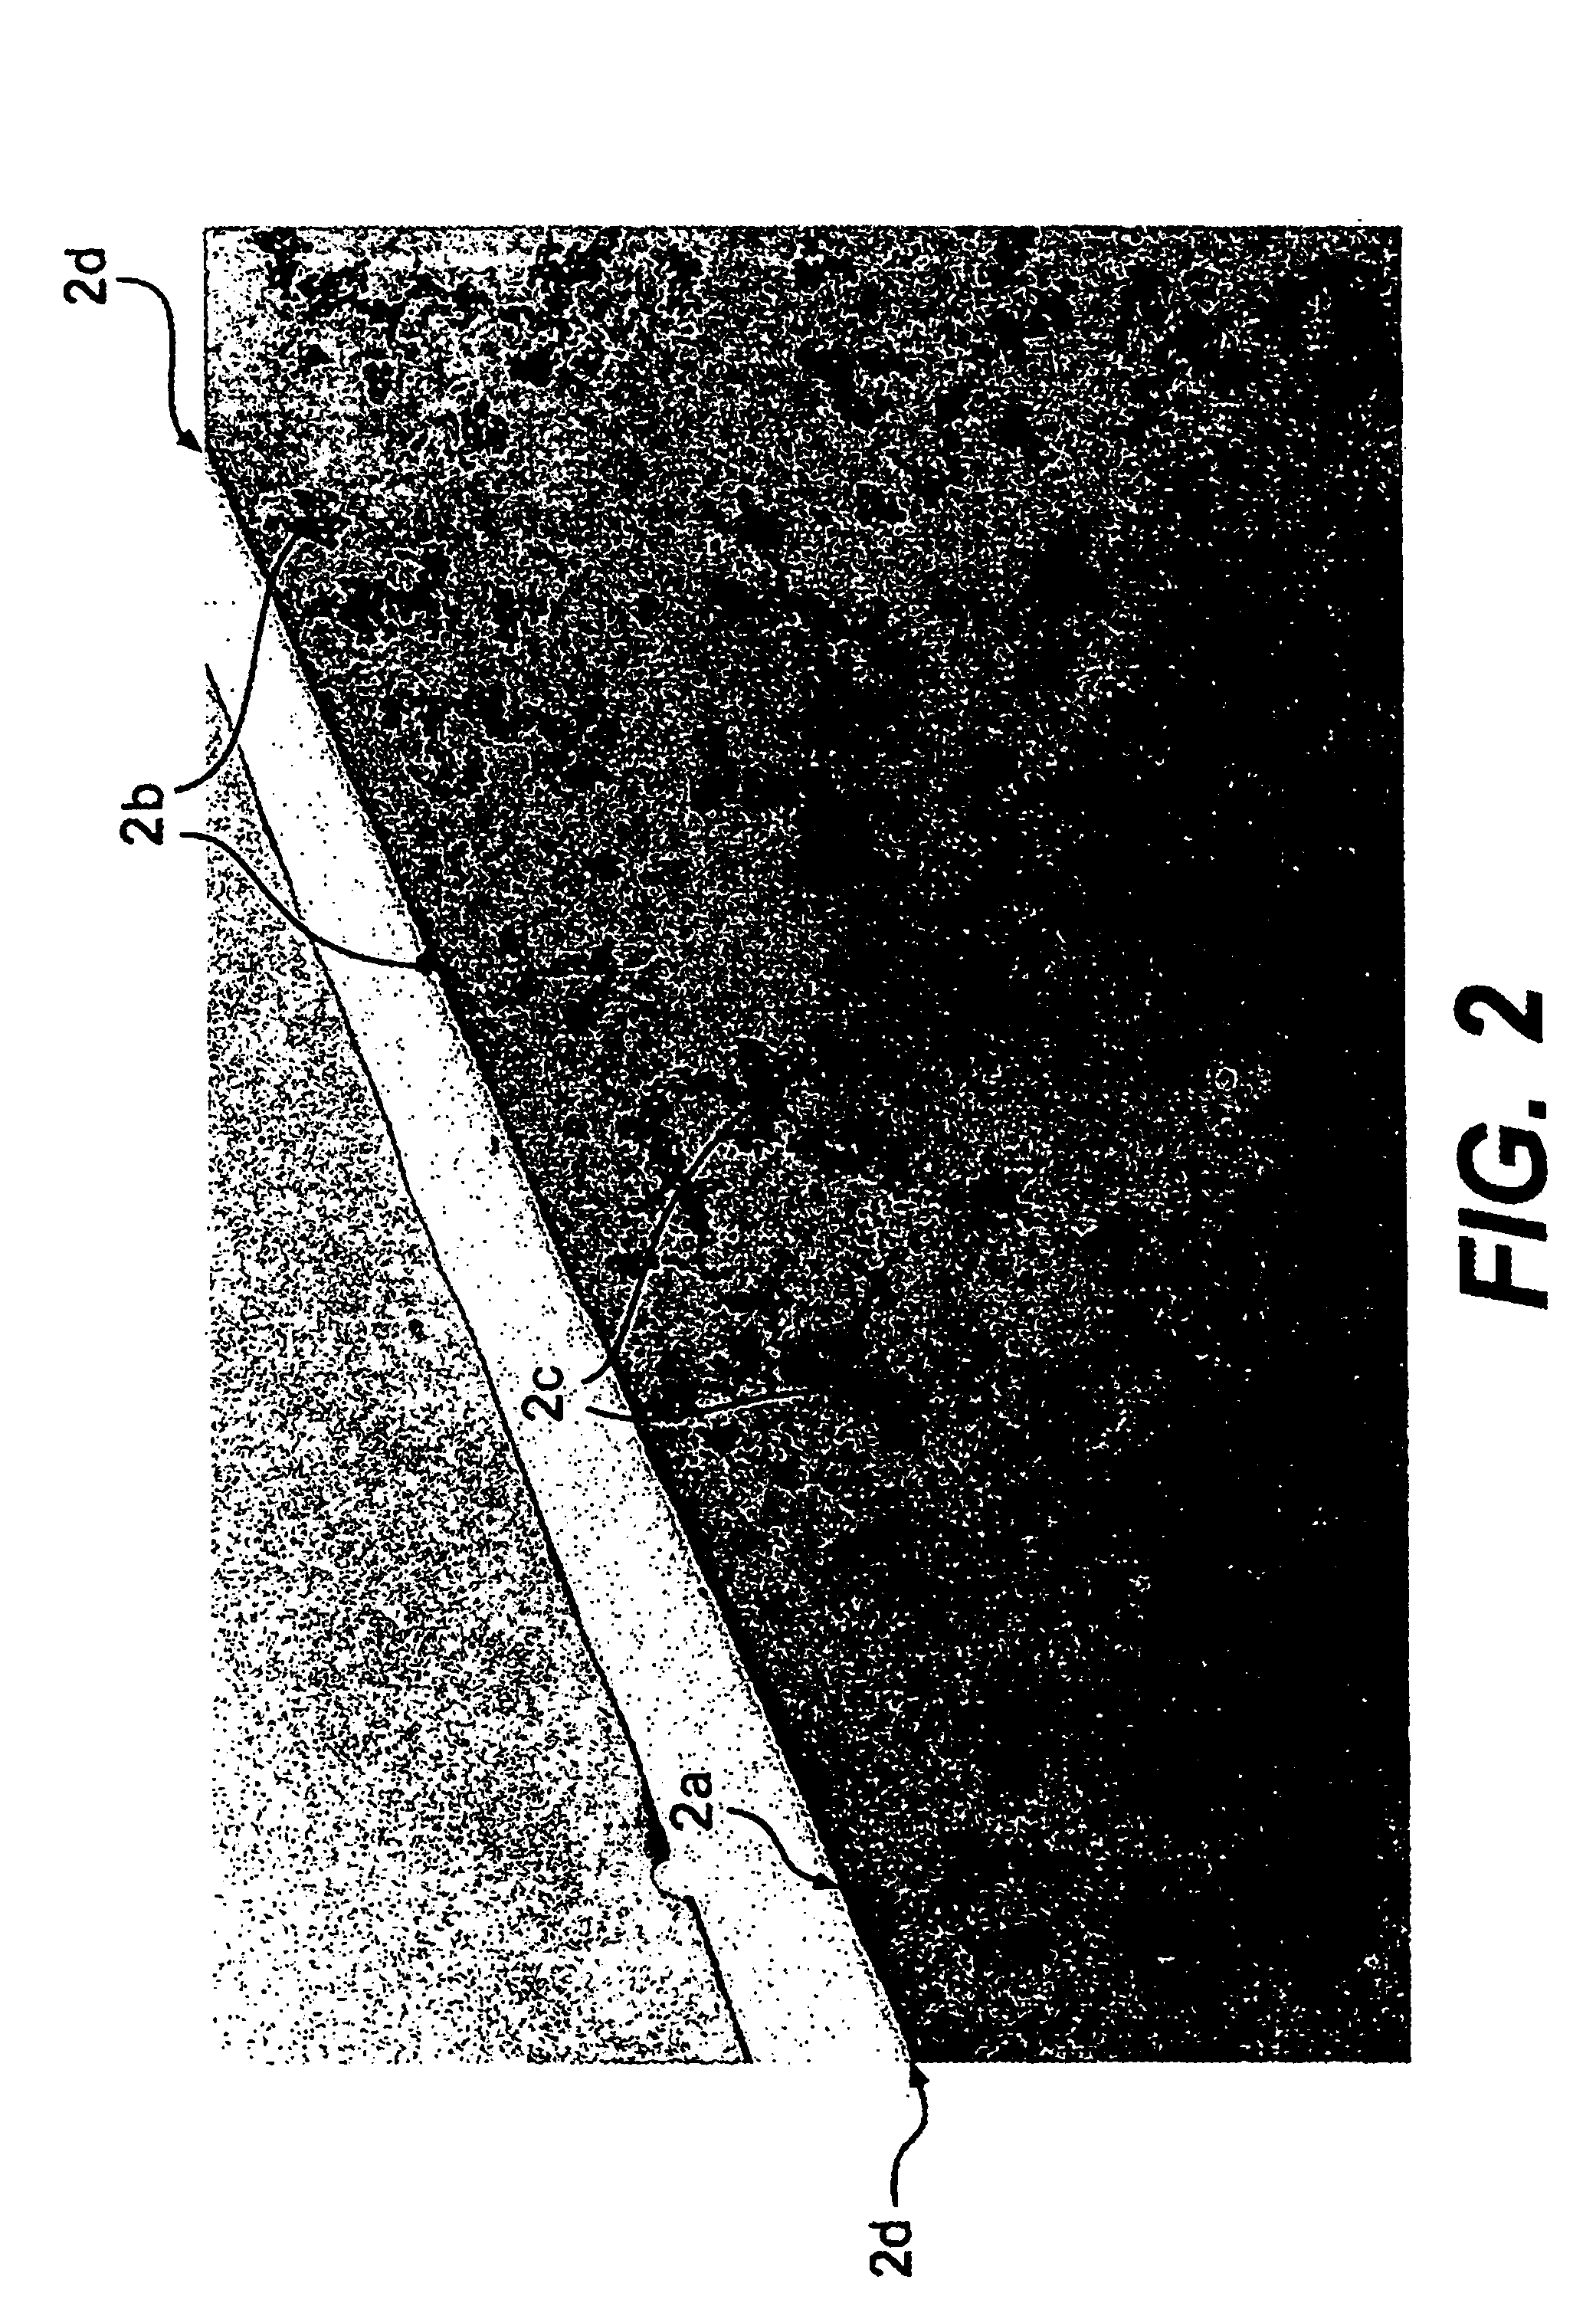 Coating compositions having improved scratch resistance, coated substrates and methods related thereto